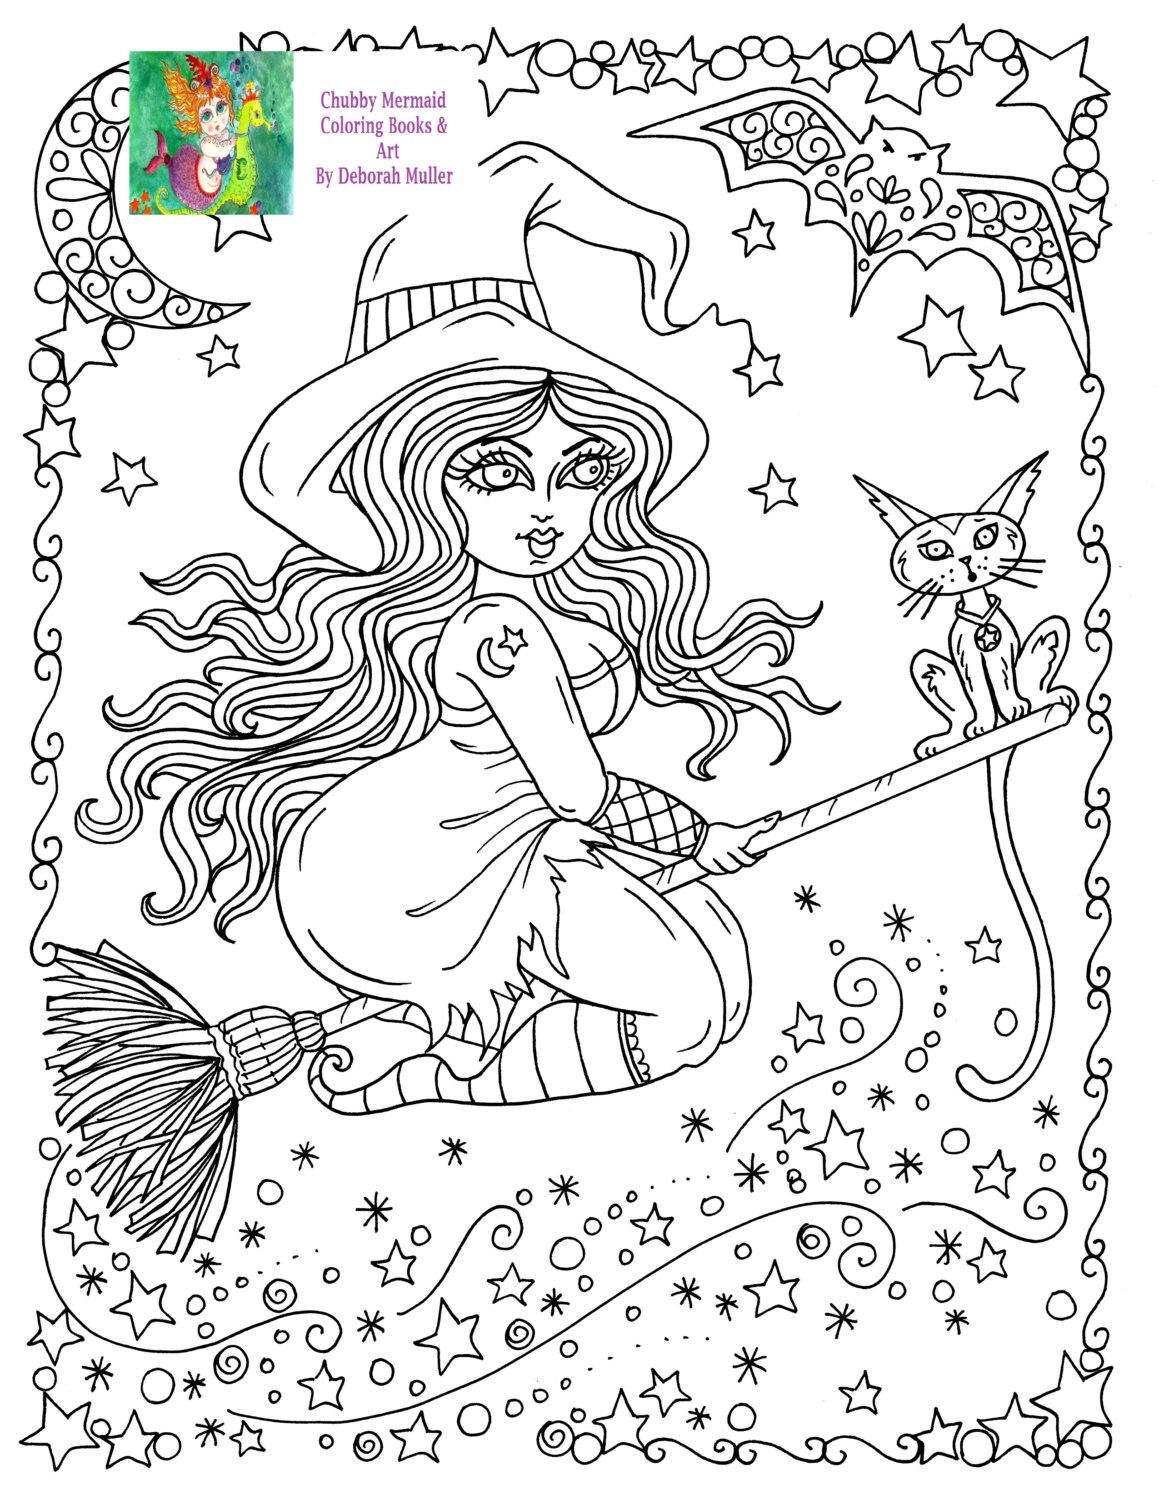 Instant download chubby flying witch halloween coloring page adult color spooky cutedigitaldigi stampdigifallcat instant download